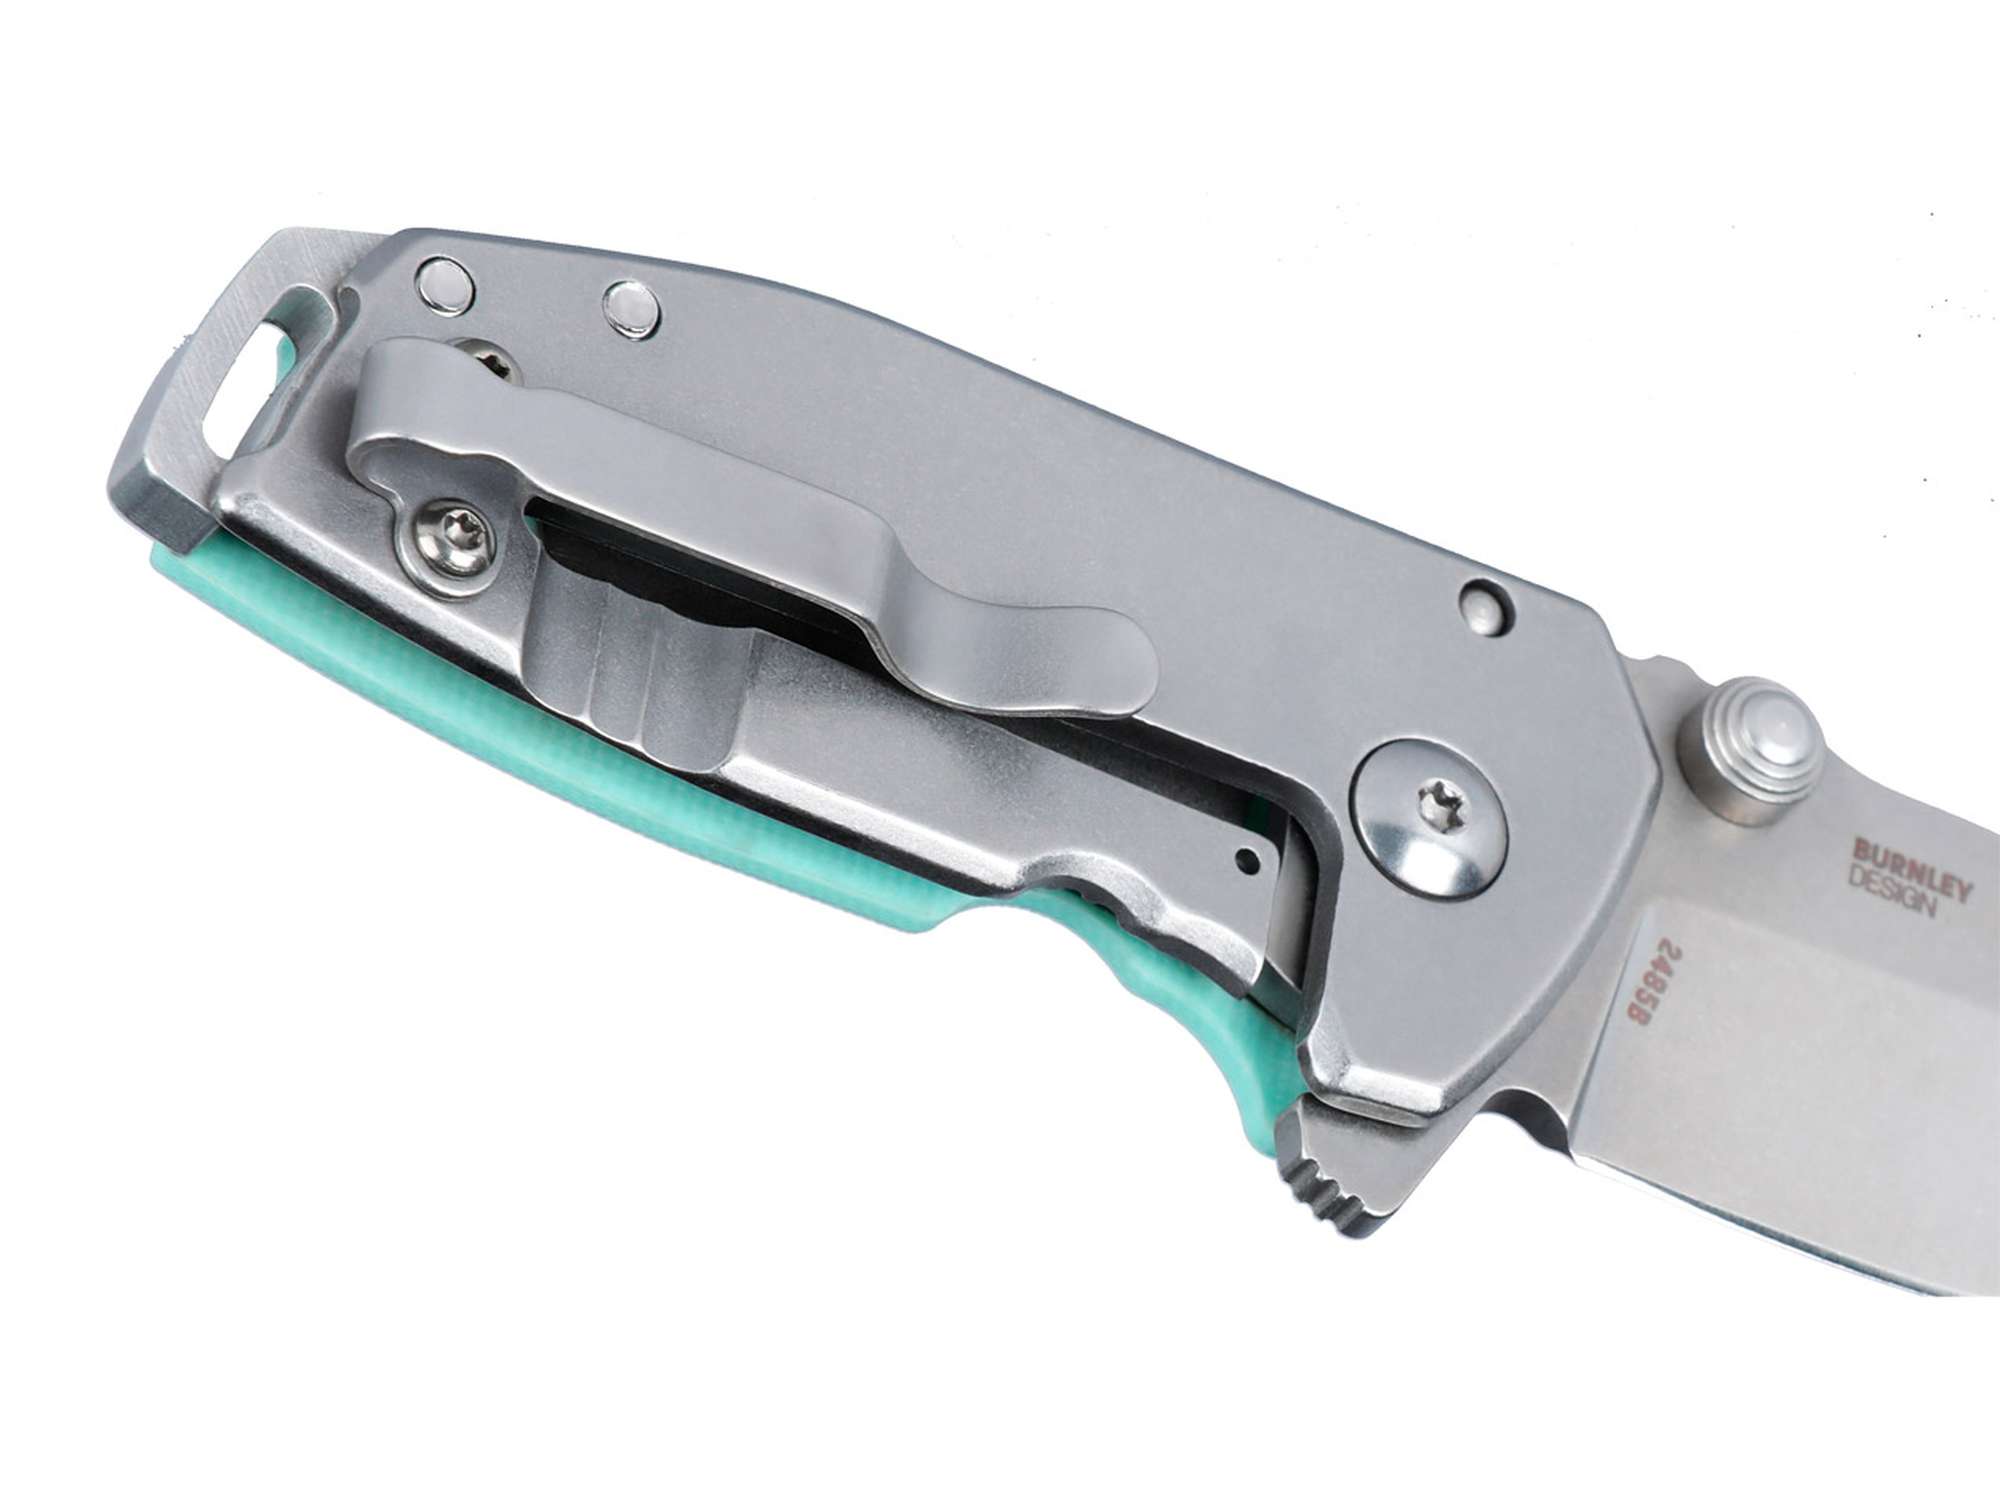 Squid Compact G10 Skyblue